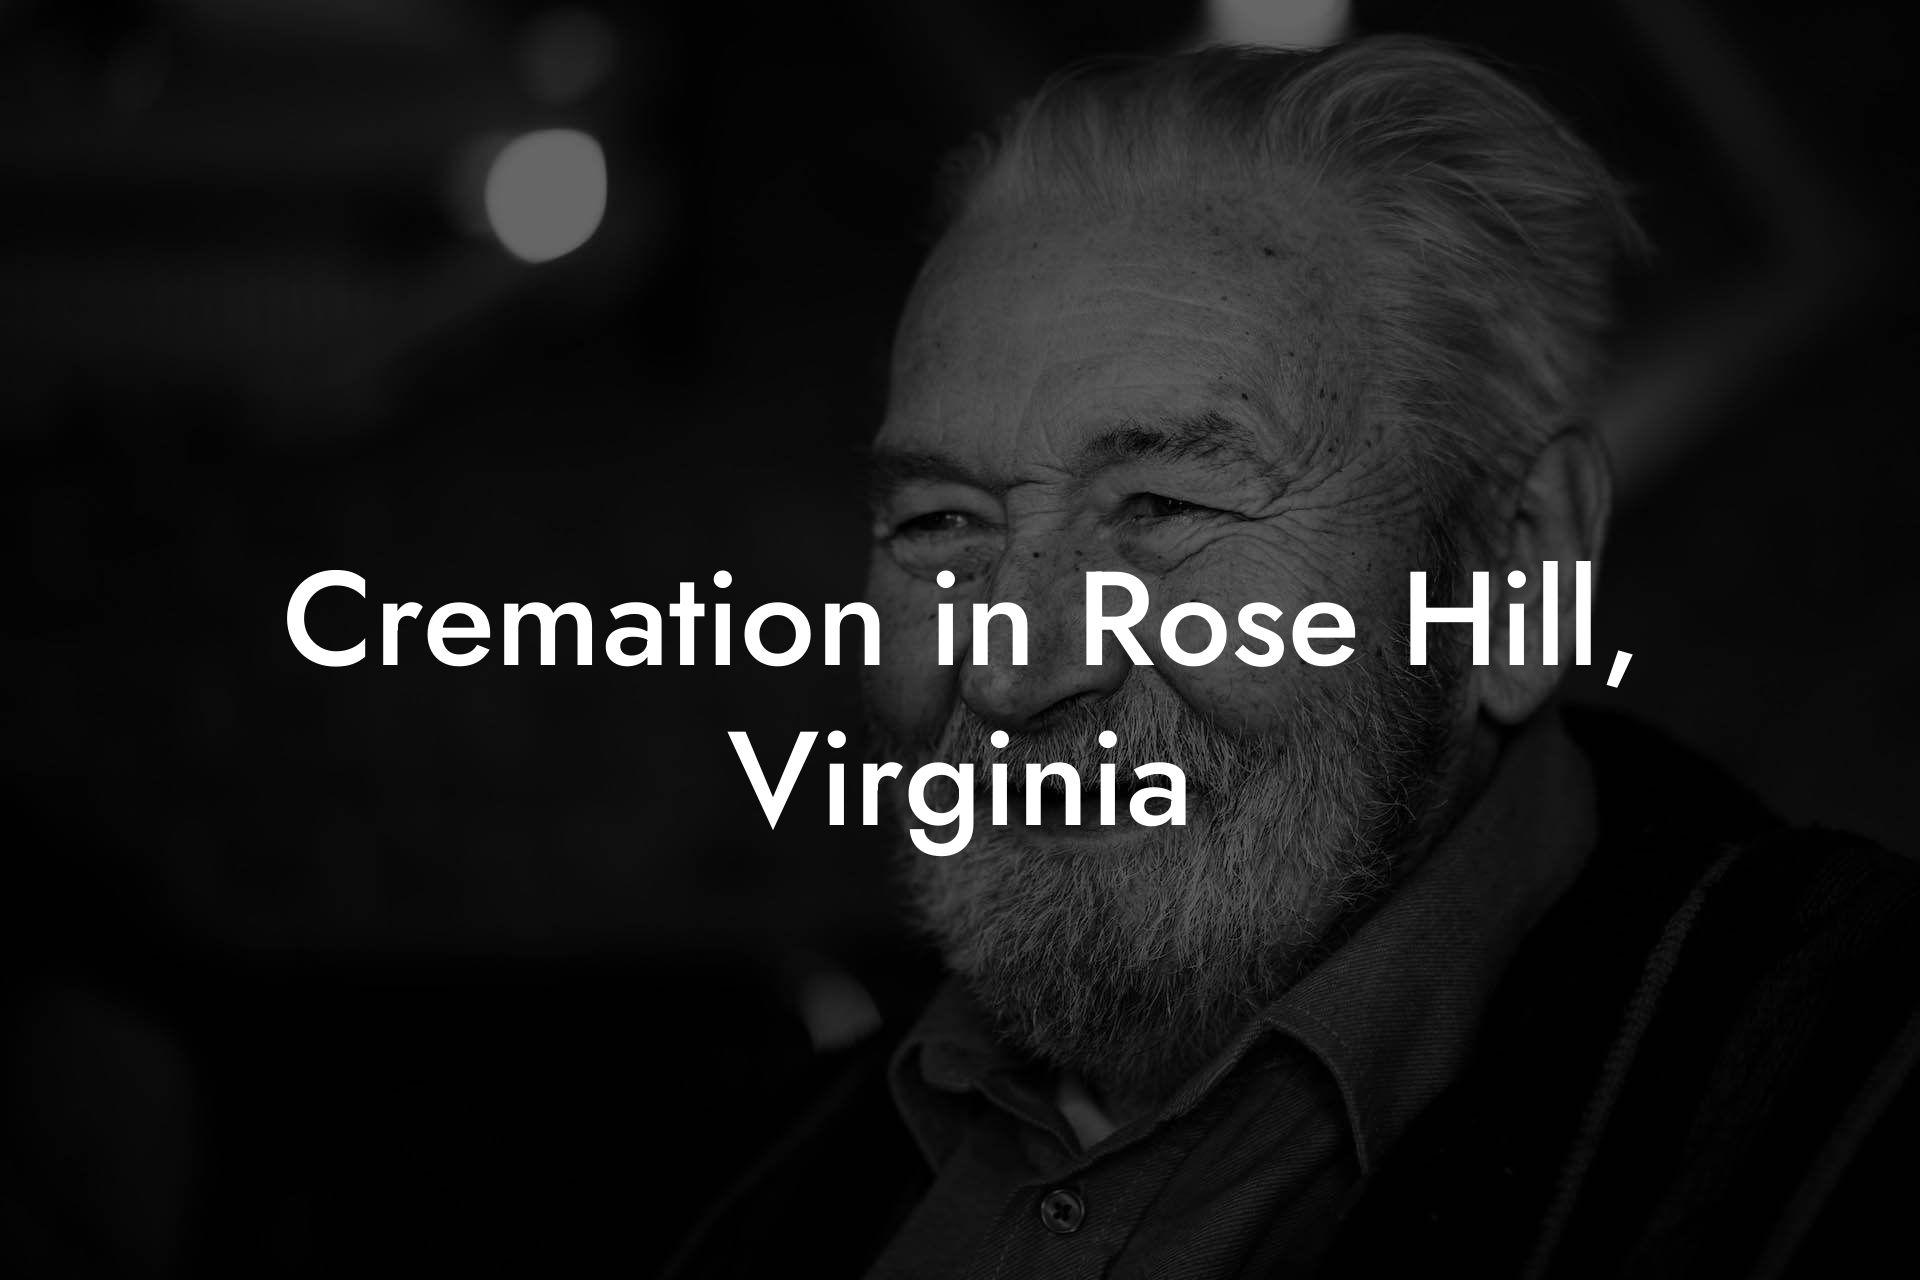 Cremation in Rose Hill, Virginia